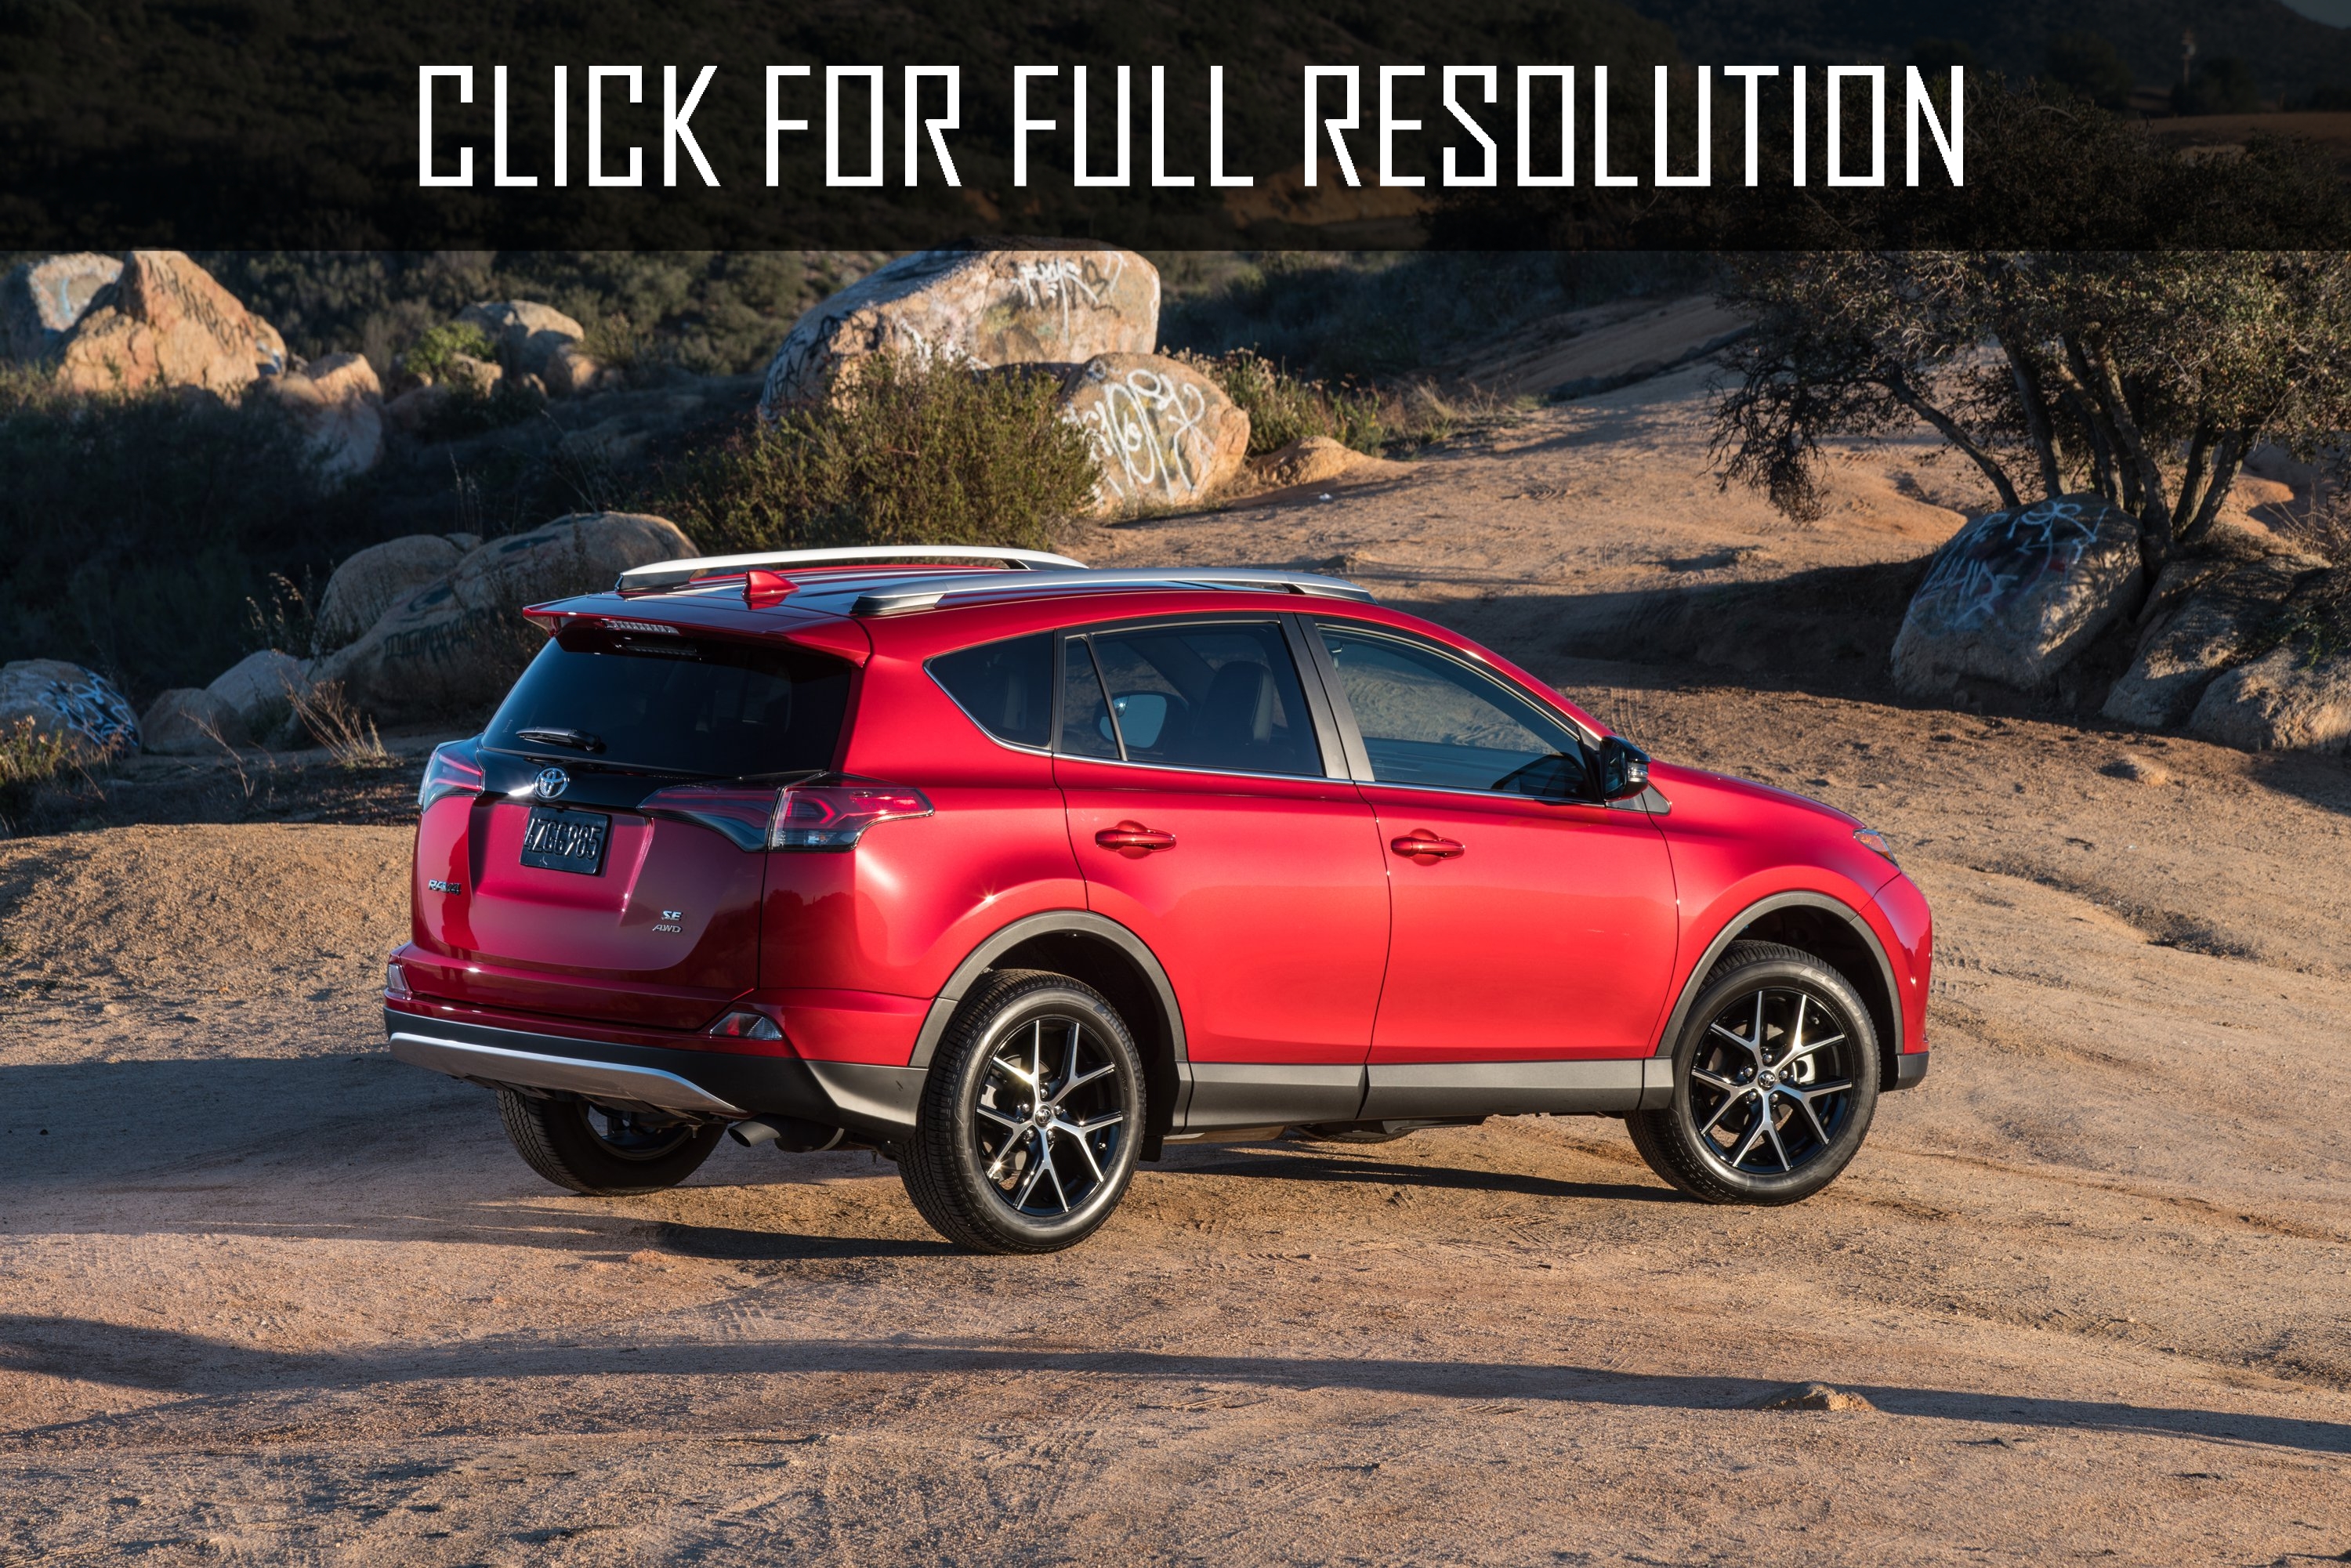 2016 Toyota Rav4 Se News Reviews Msrp Ratings With Amazing Images